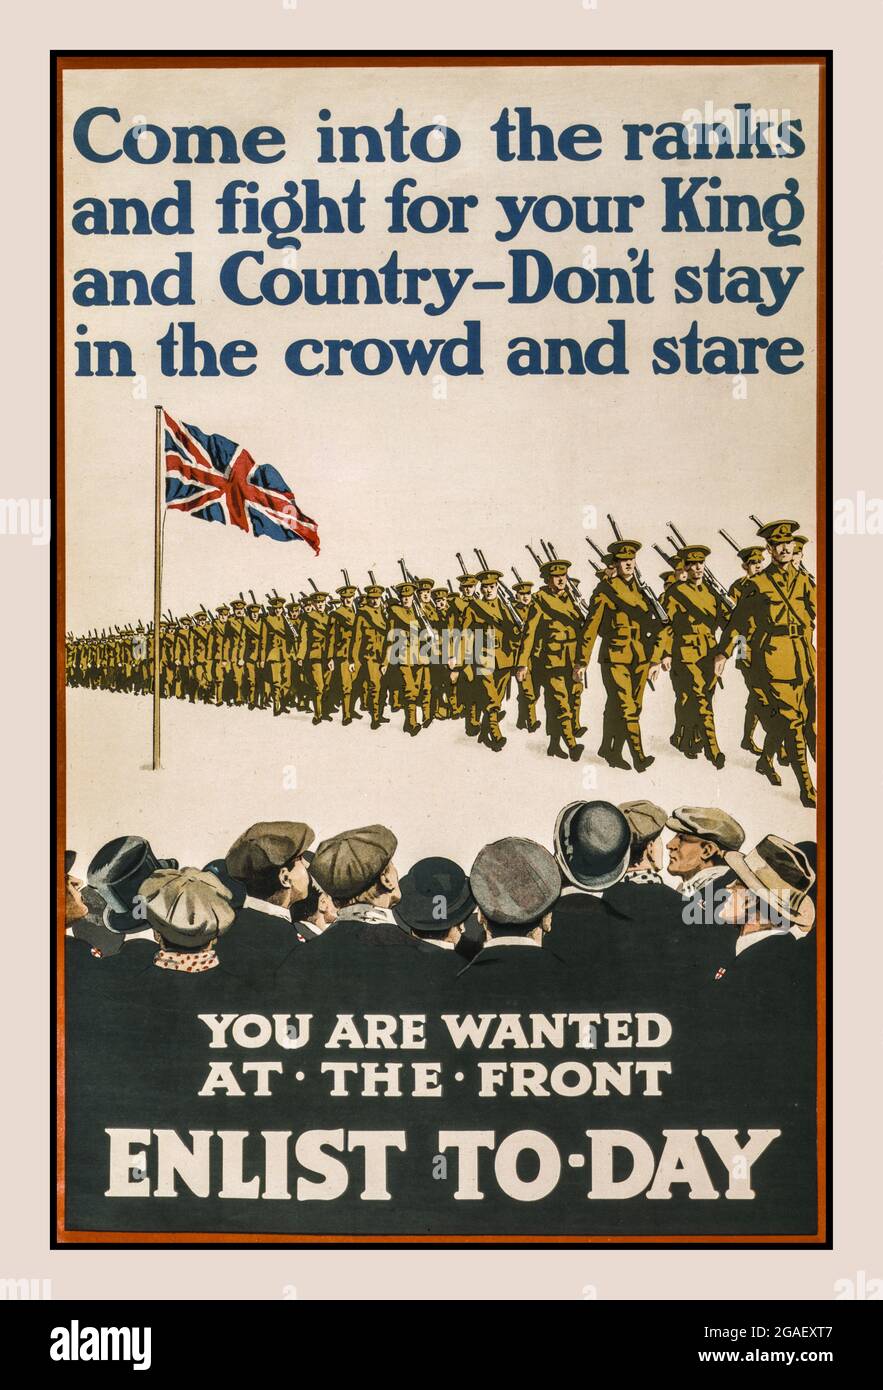 Vintage WW1 Recruiting Enlisting Poster UK  'Come into the ranks and fight for your king and country - don't stay in the crowd and stare. You are wanted at the front. Enlist to-day' / printed by Roberts & Leete Ltd., London. Date Created/Published: London : Parliamentary Recruiting Committee, [1915] (poster) : lithograph, color   Poster showing men, some wearing the Union Jack on their lapels, watching as soldiers march by. World War, 1914-1918--Recruiting & enlistment--Great Britain. Soldiers--British--1910-1920. Marching--1910-1920. Spectators--1910-1920. Stock Photo